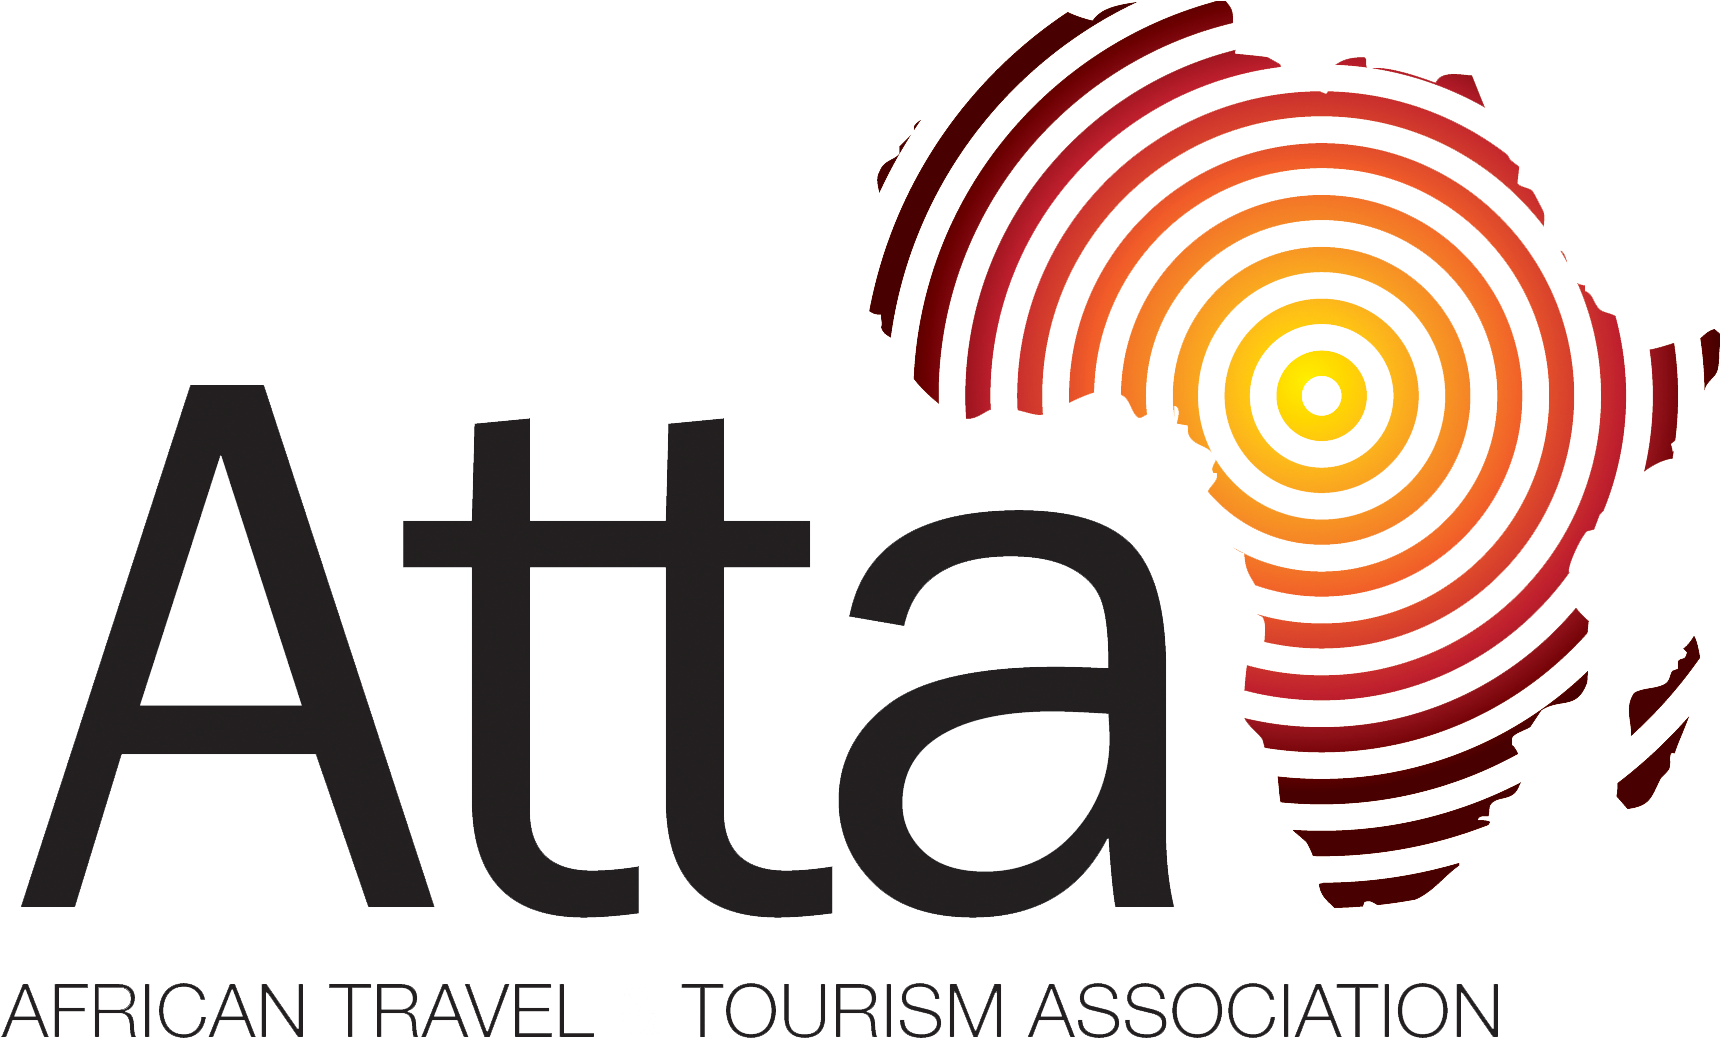 Directions - African Travel And Tourism Association (1721x1054)